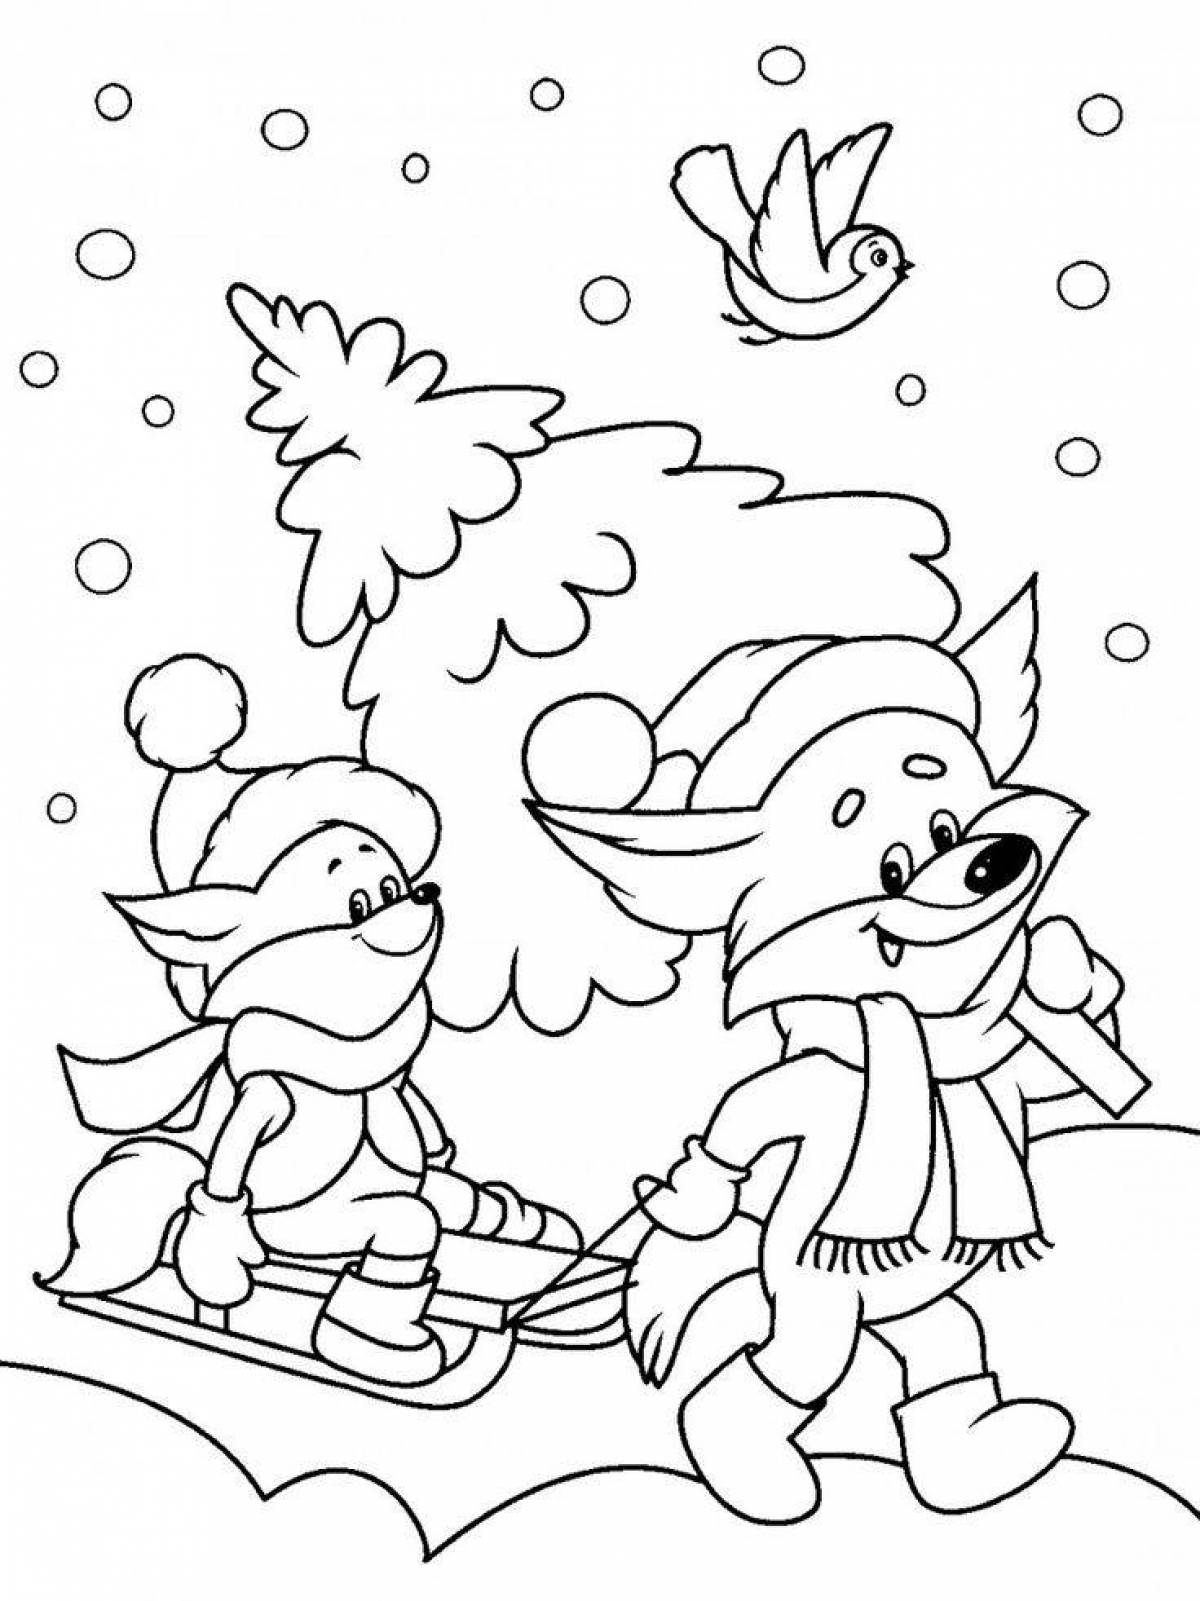 Bright winter coloring book for children 3-4 years old